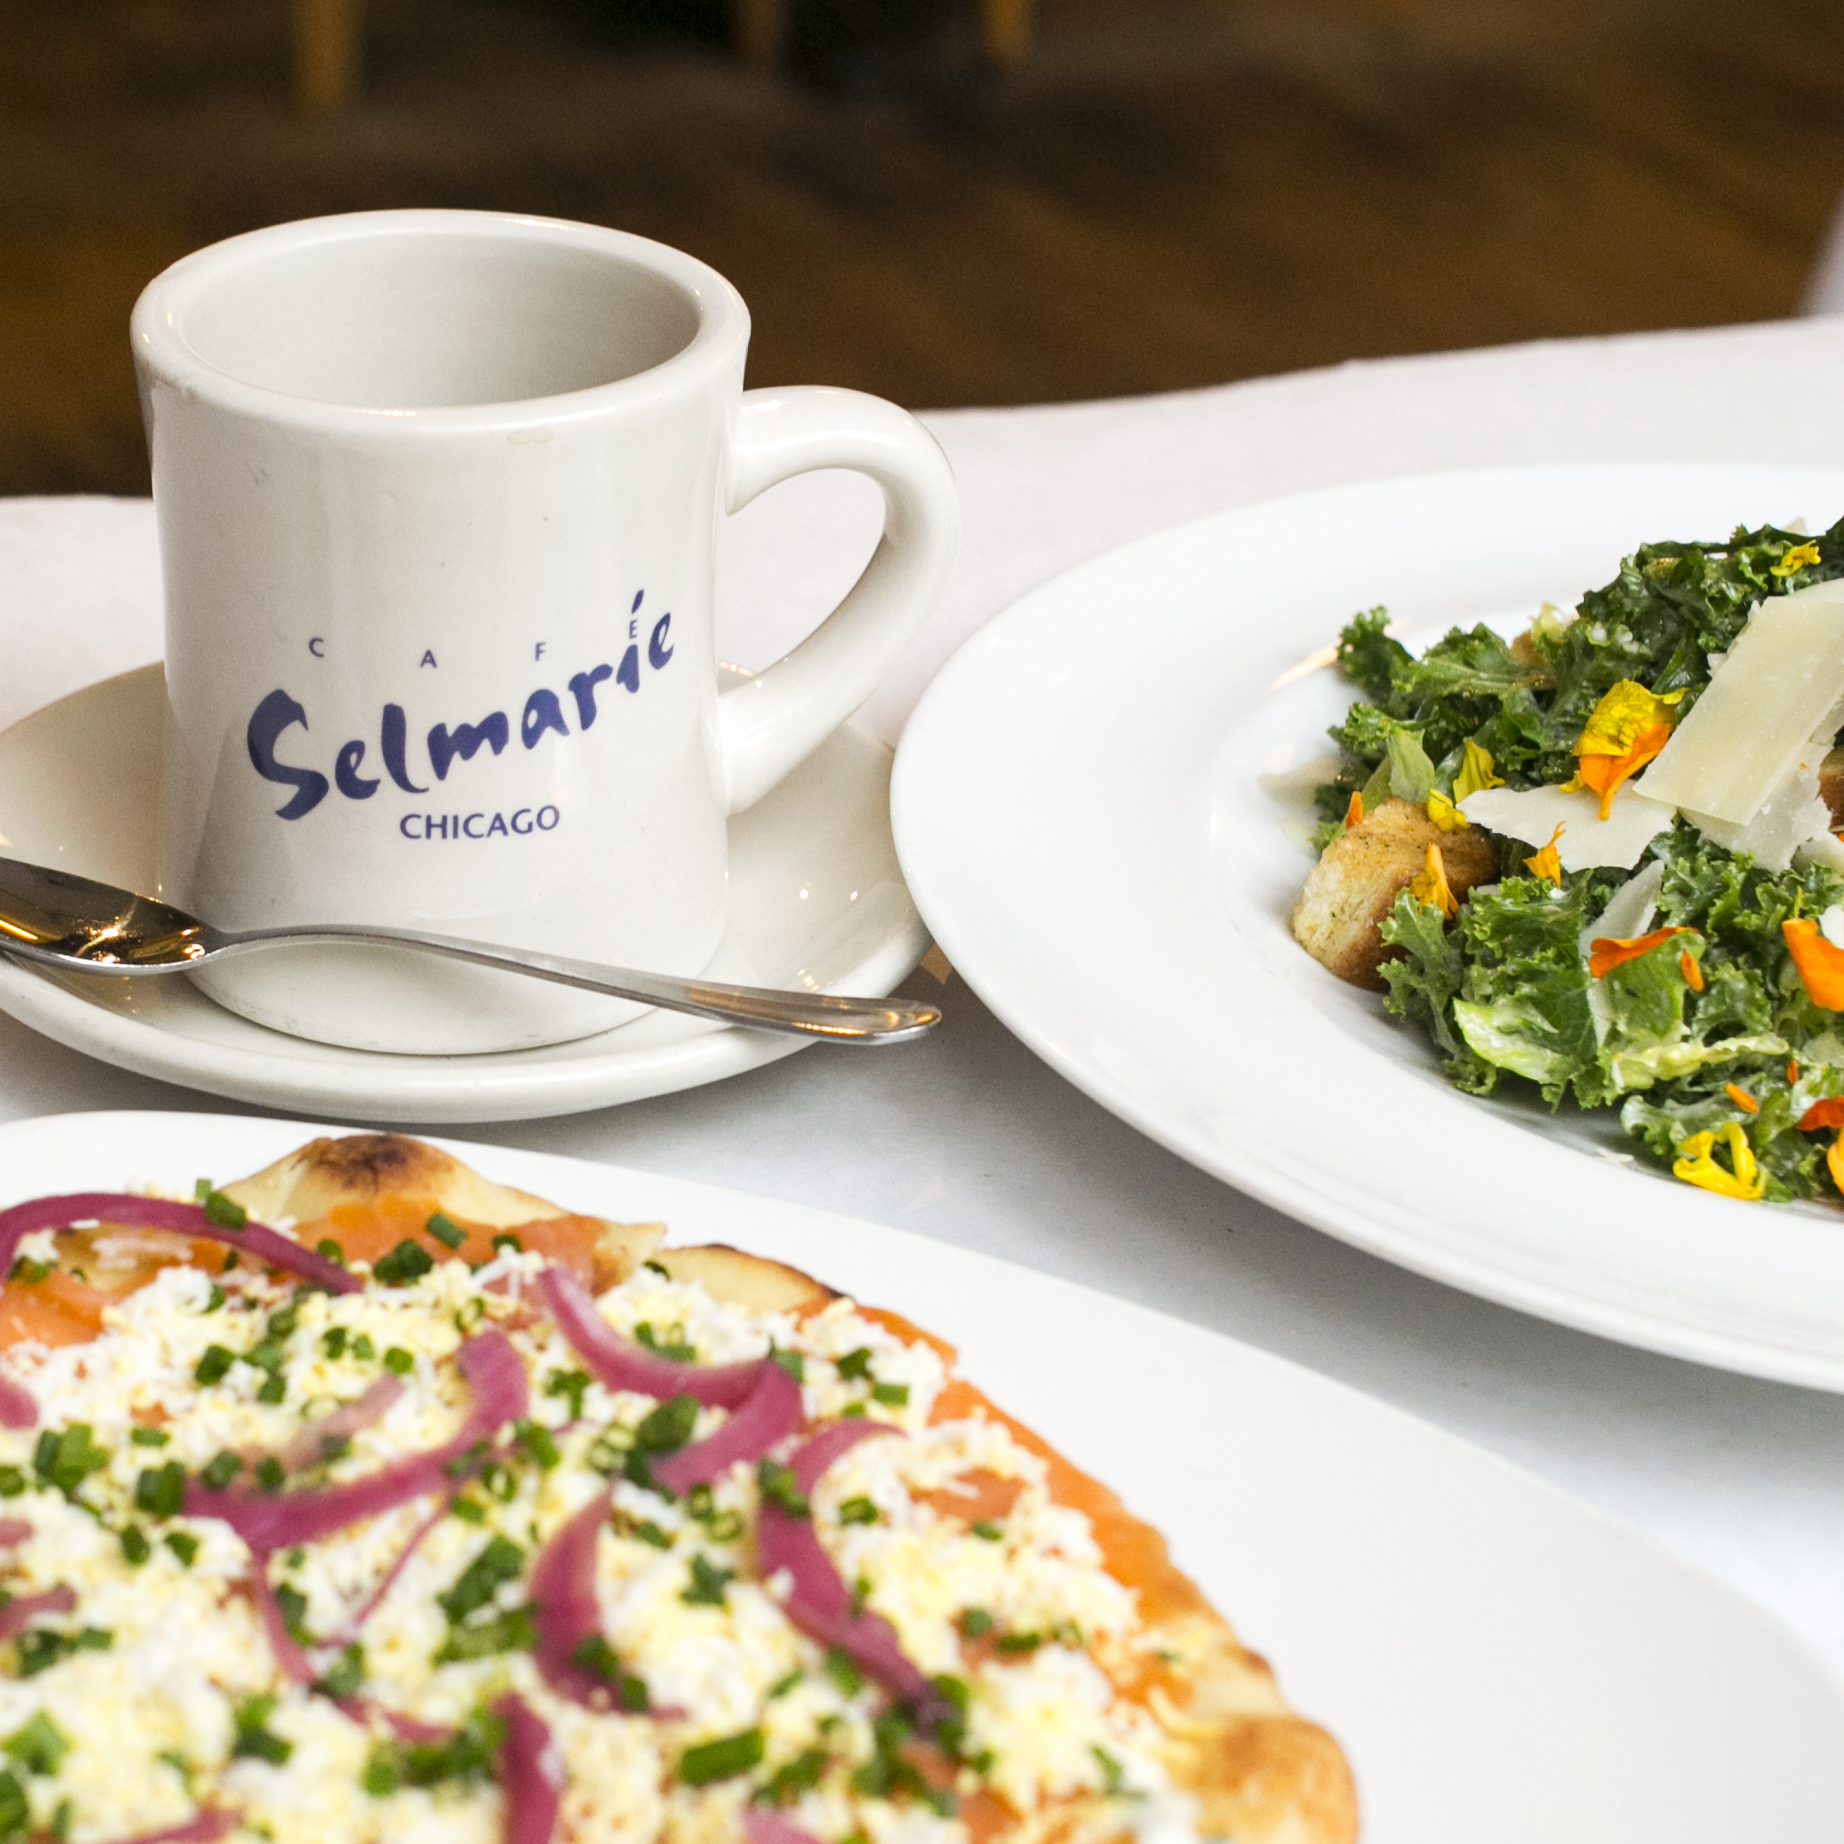 Salmon flatbread, salad, and coffee cup at Cafe Selmarie.